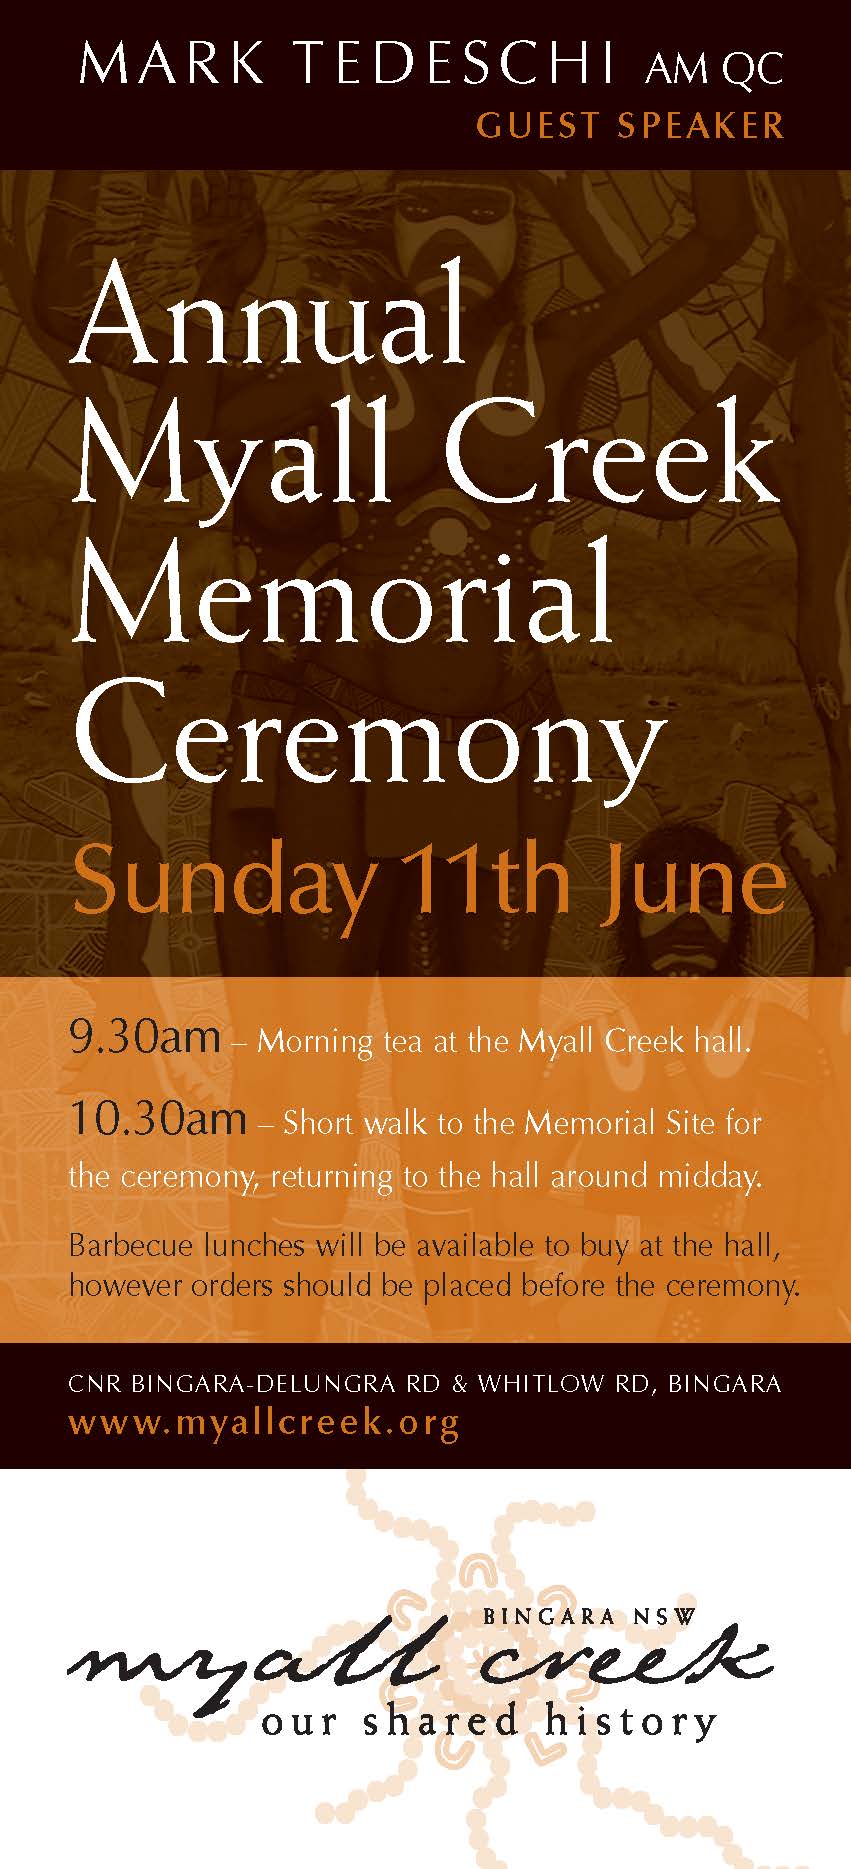 Annual Myall Creek Memorial Ceremony